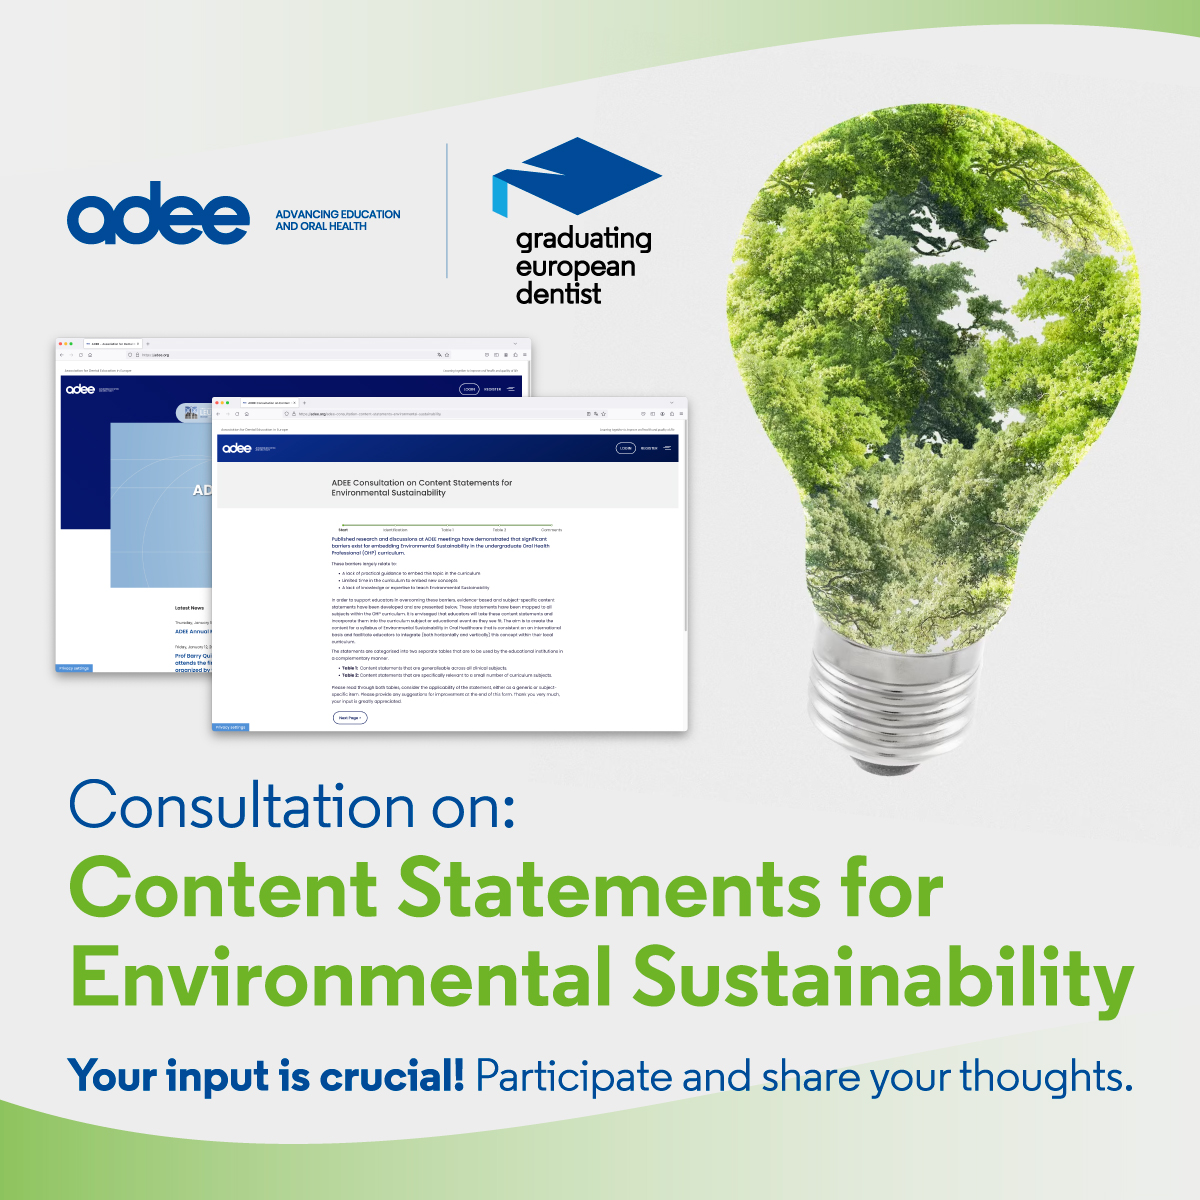 ADEE members are shaping the future of Oral Health Professional education with a focus on Environmental Sustainability. Dive into the conversation and contribute! adee.org/adee-consultat…🦷💚 #ADEE #environmentalsustainability #oralhealtheducation #CollaborateForChange